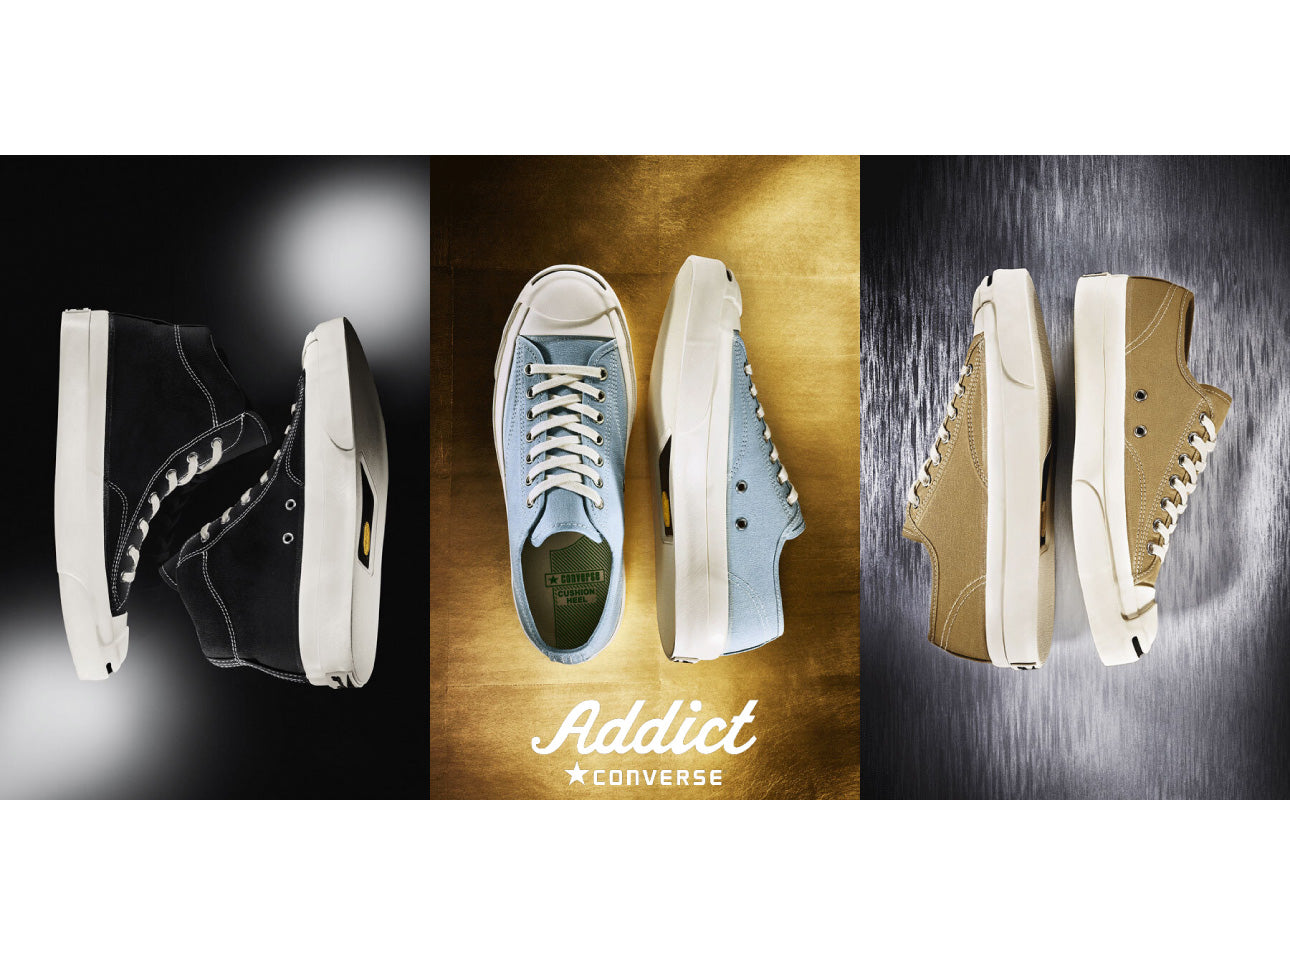 CONVERSE ADDICT 2023 HOLIDAY COLLECTION